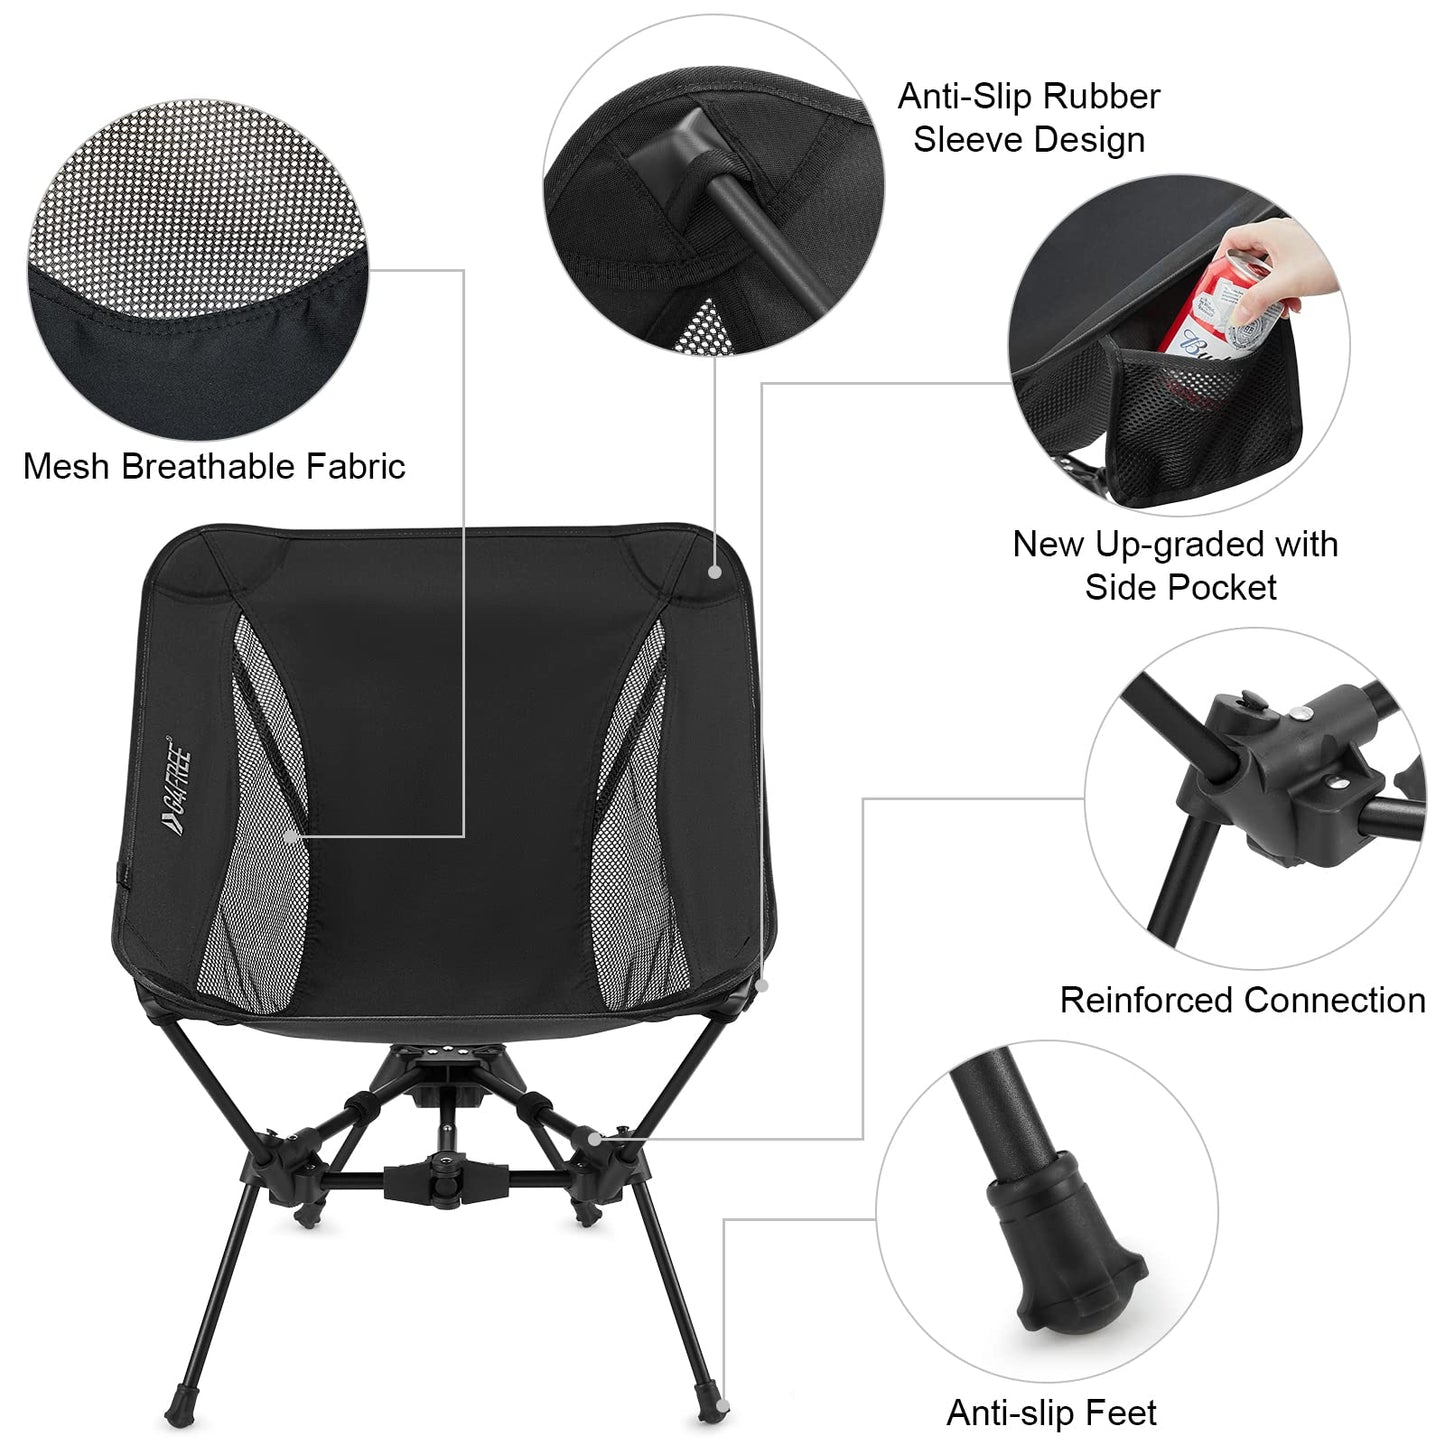 G4Free Ultralight Compact Backpacking Folding Chairs